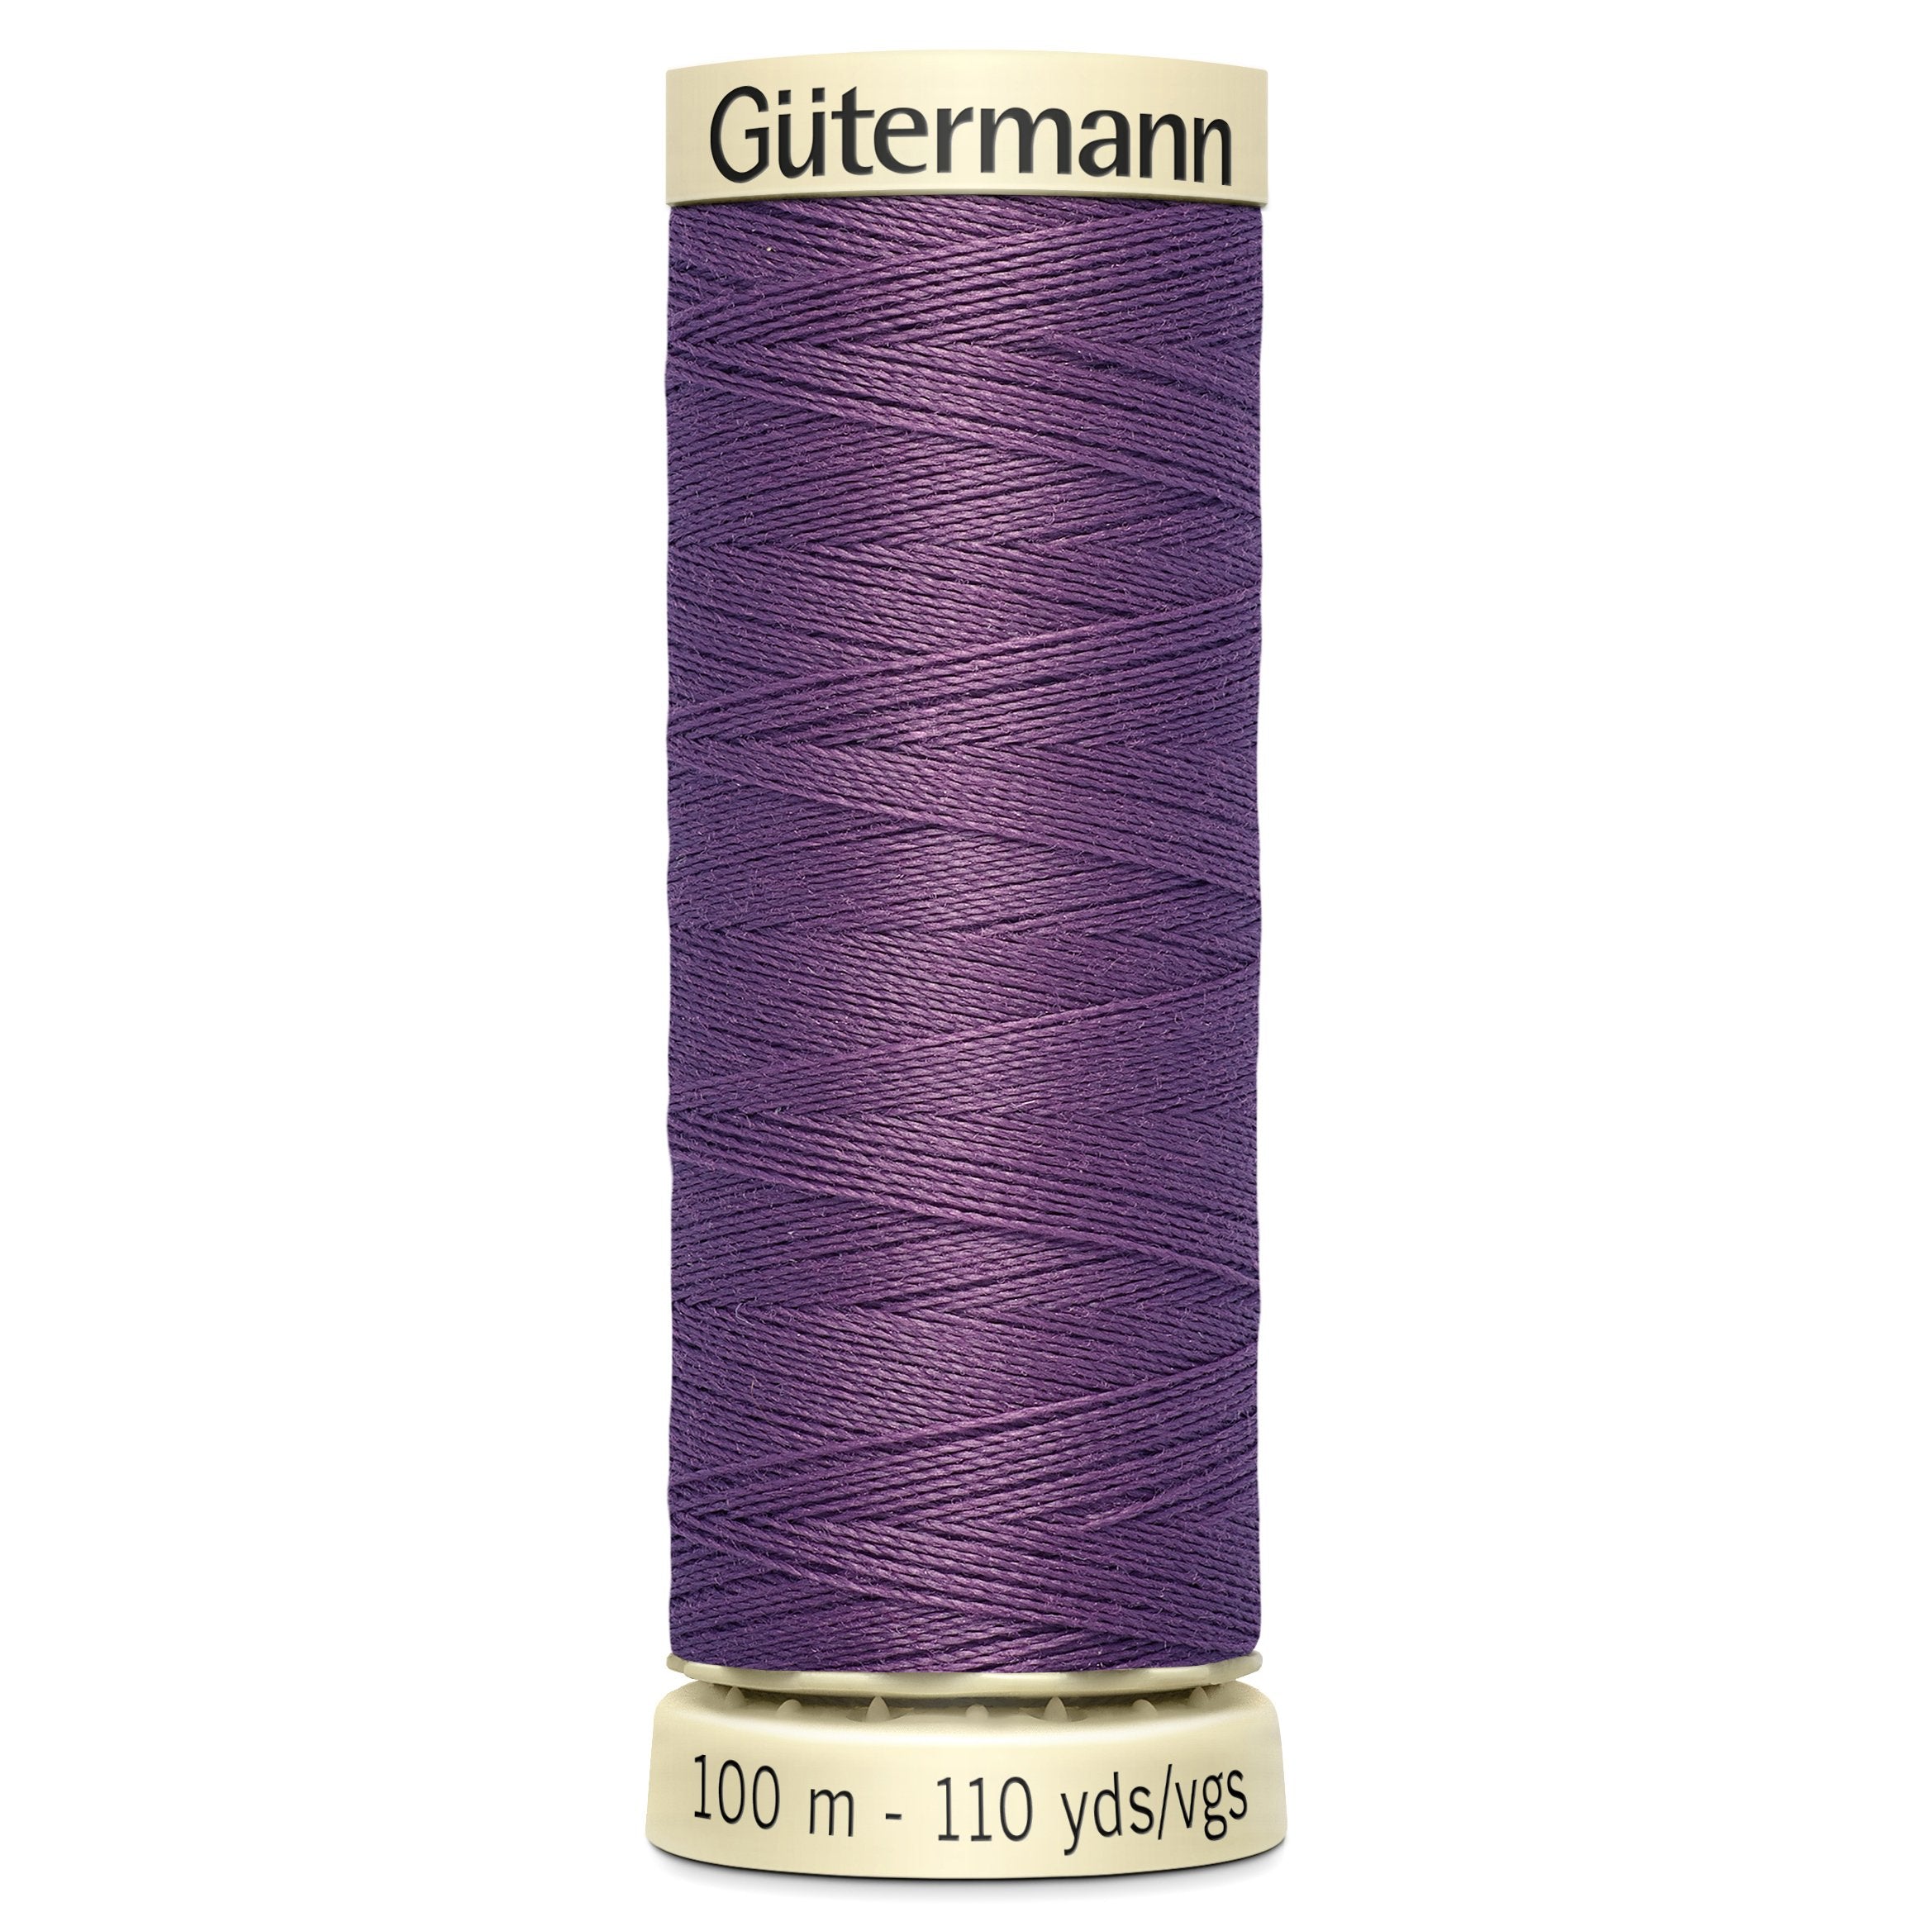 Gutermann Sew-All Polyester Sewing Thread - Colour: #129 Dusky Purple from Jaycotts Sewing Supplies